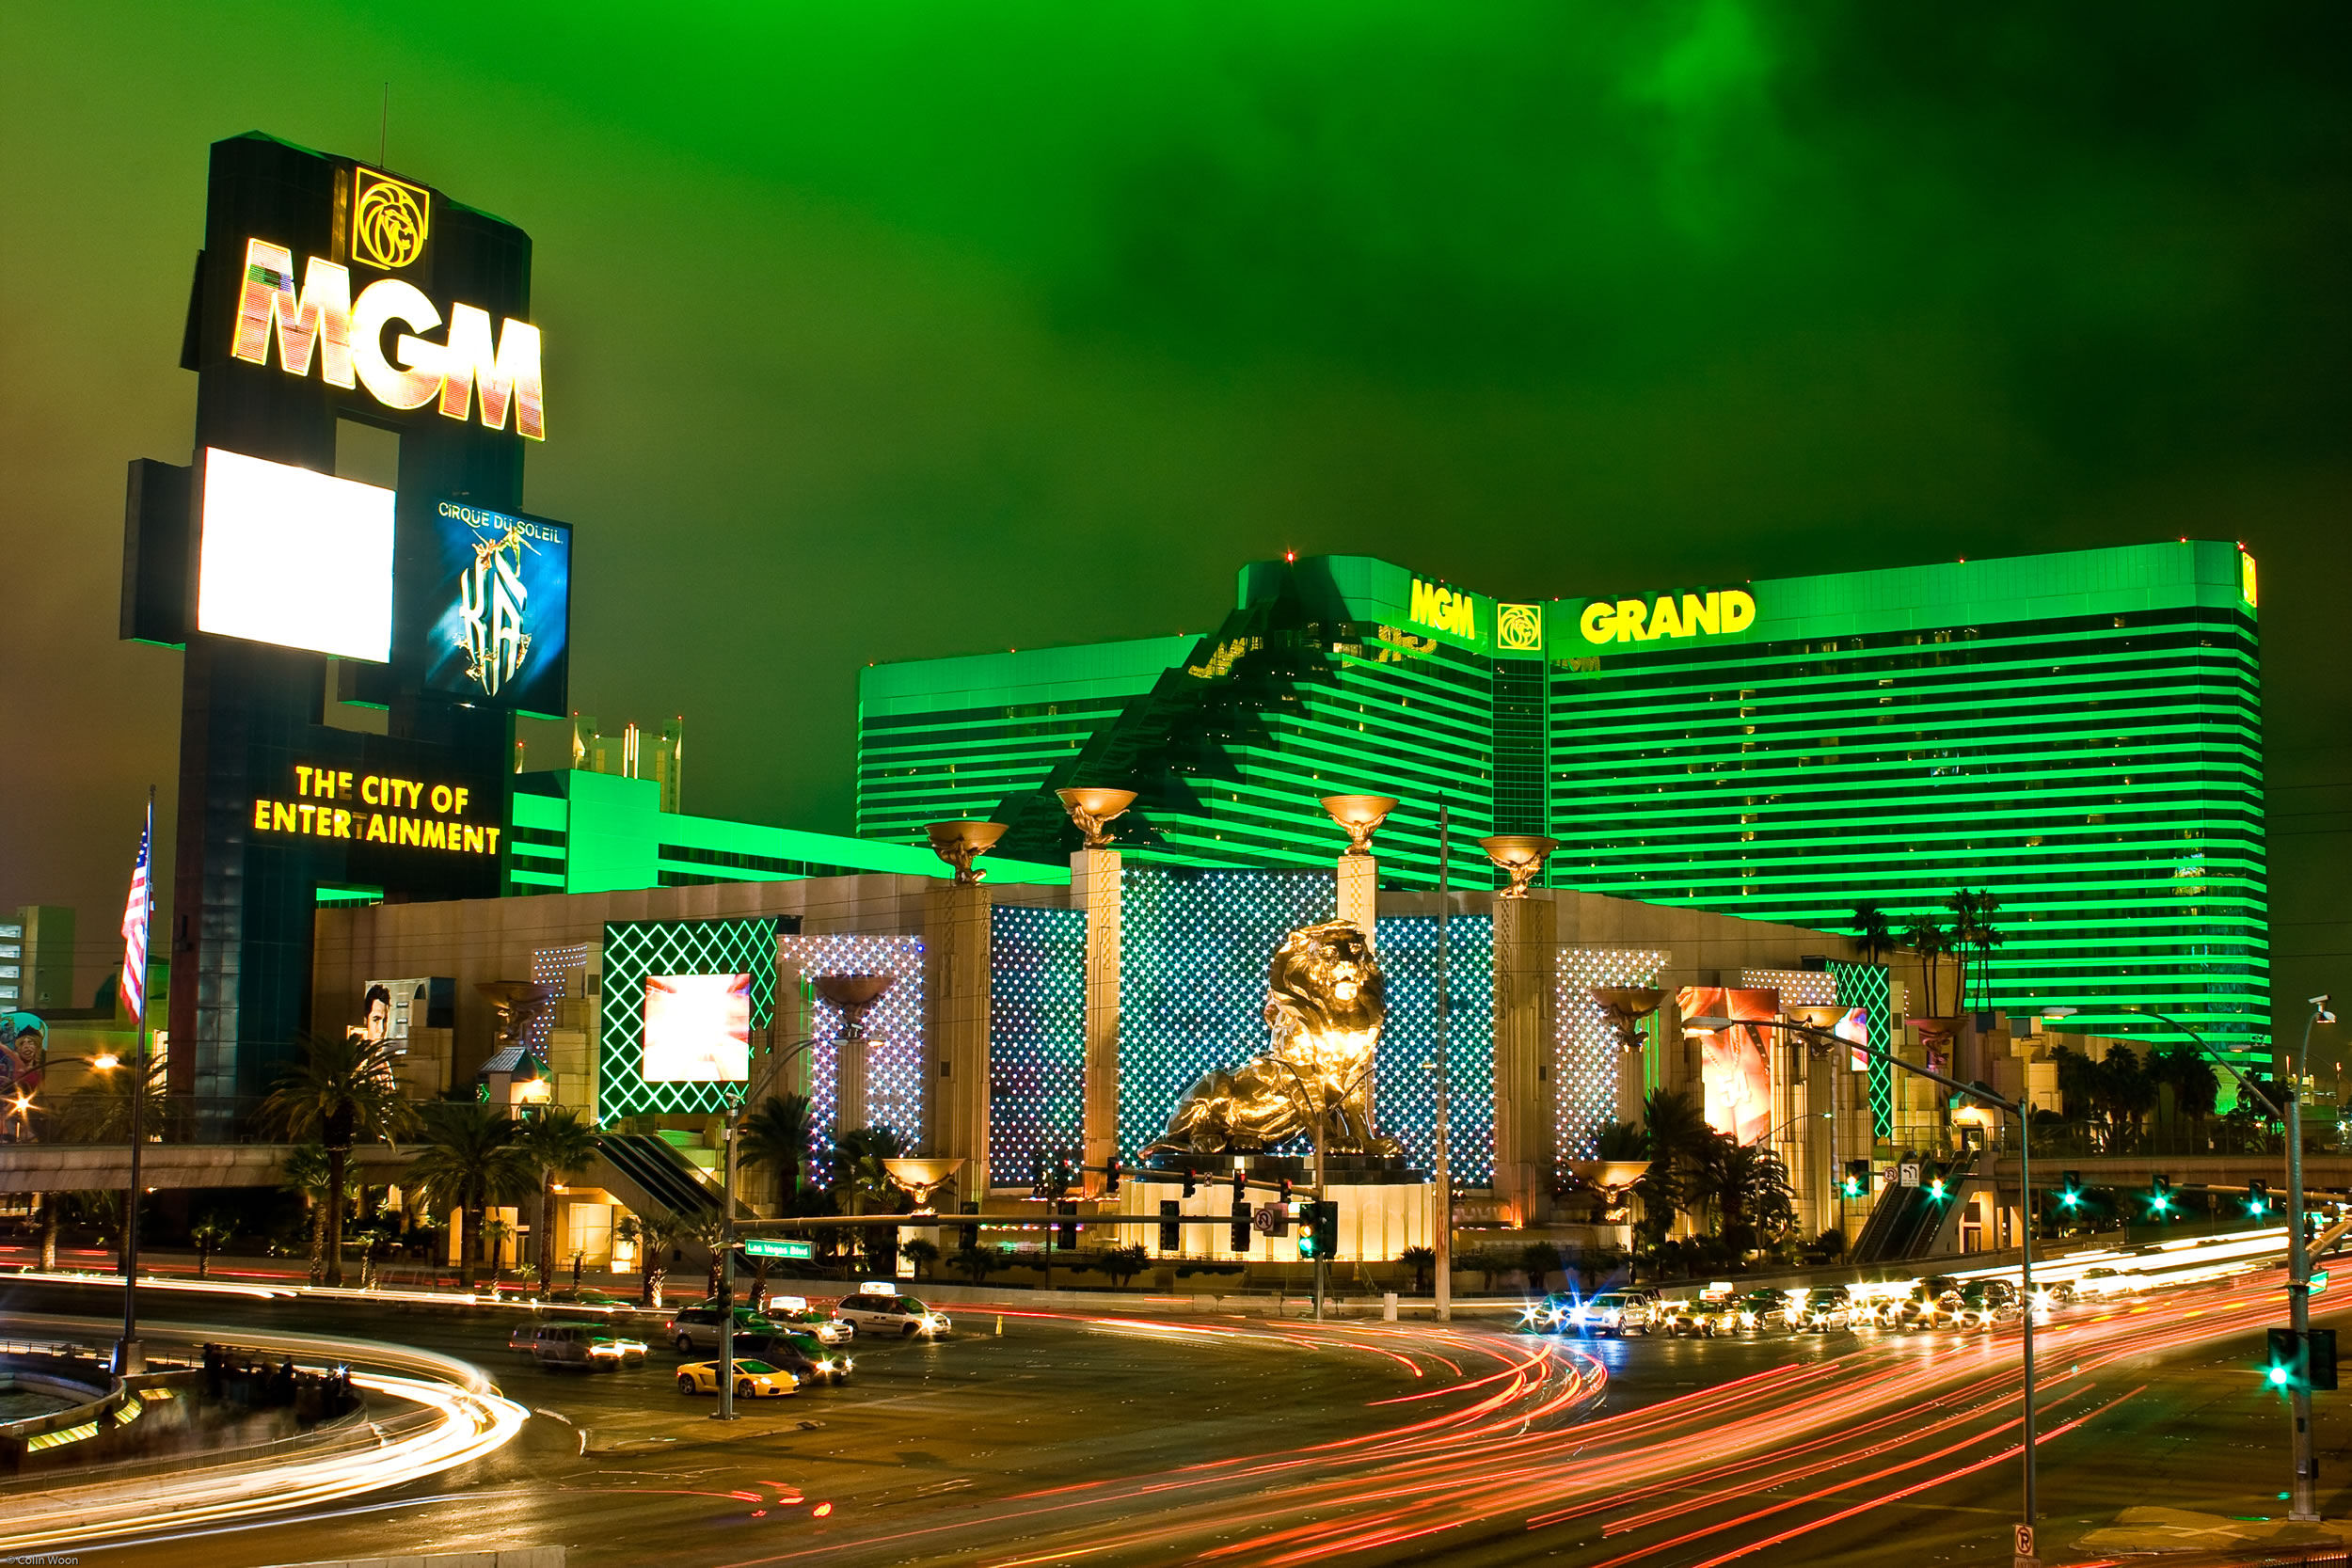 the mgm grand hotel and casino